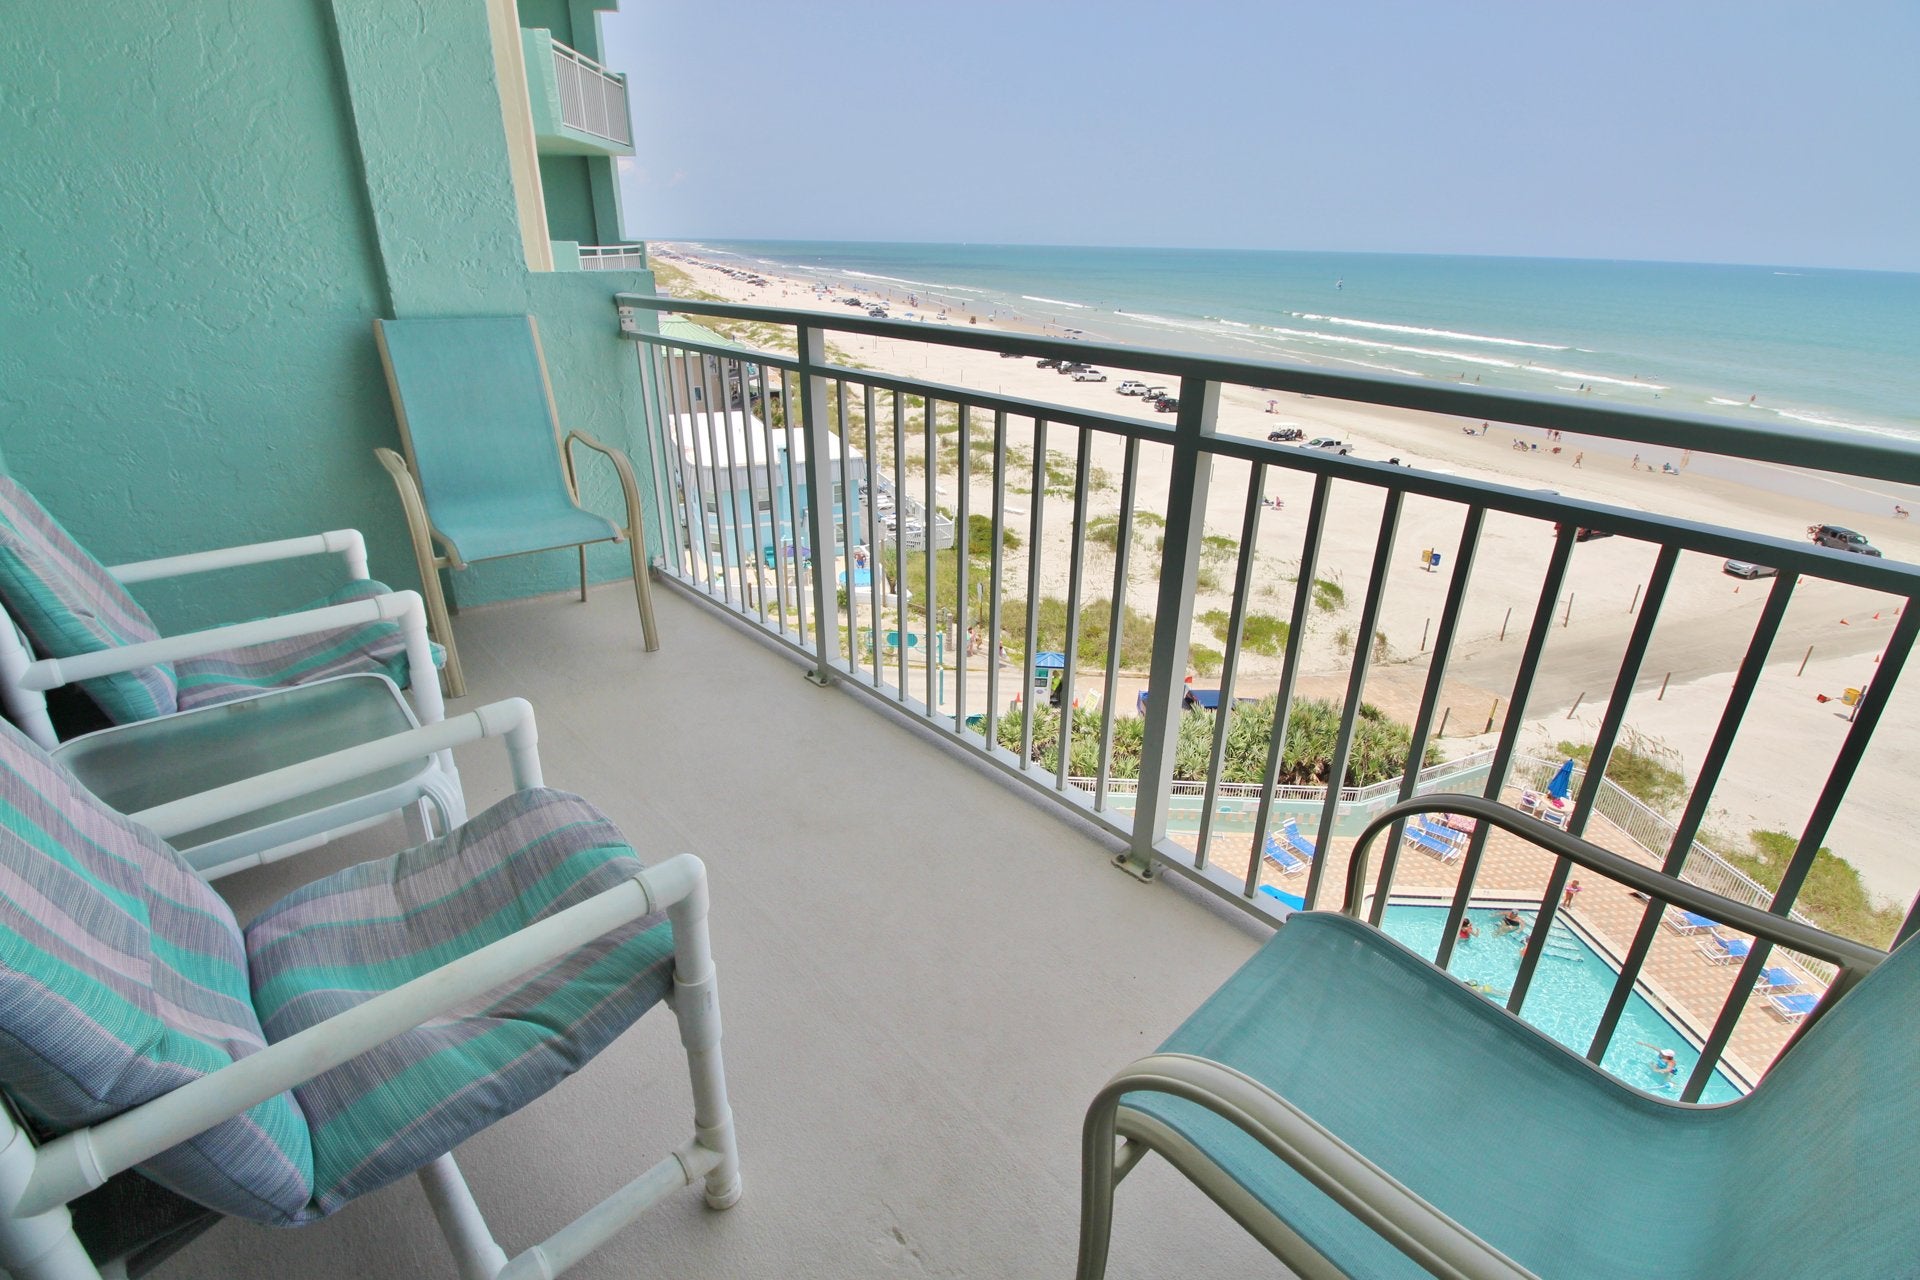 Unwind on the balcony with the salty breeze